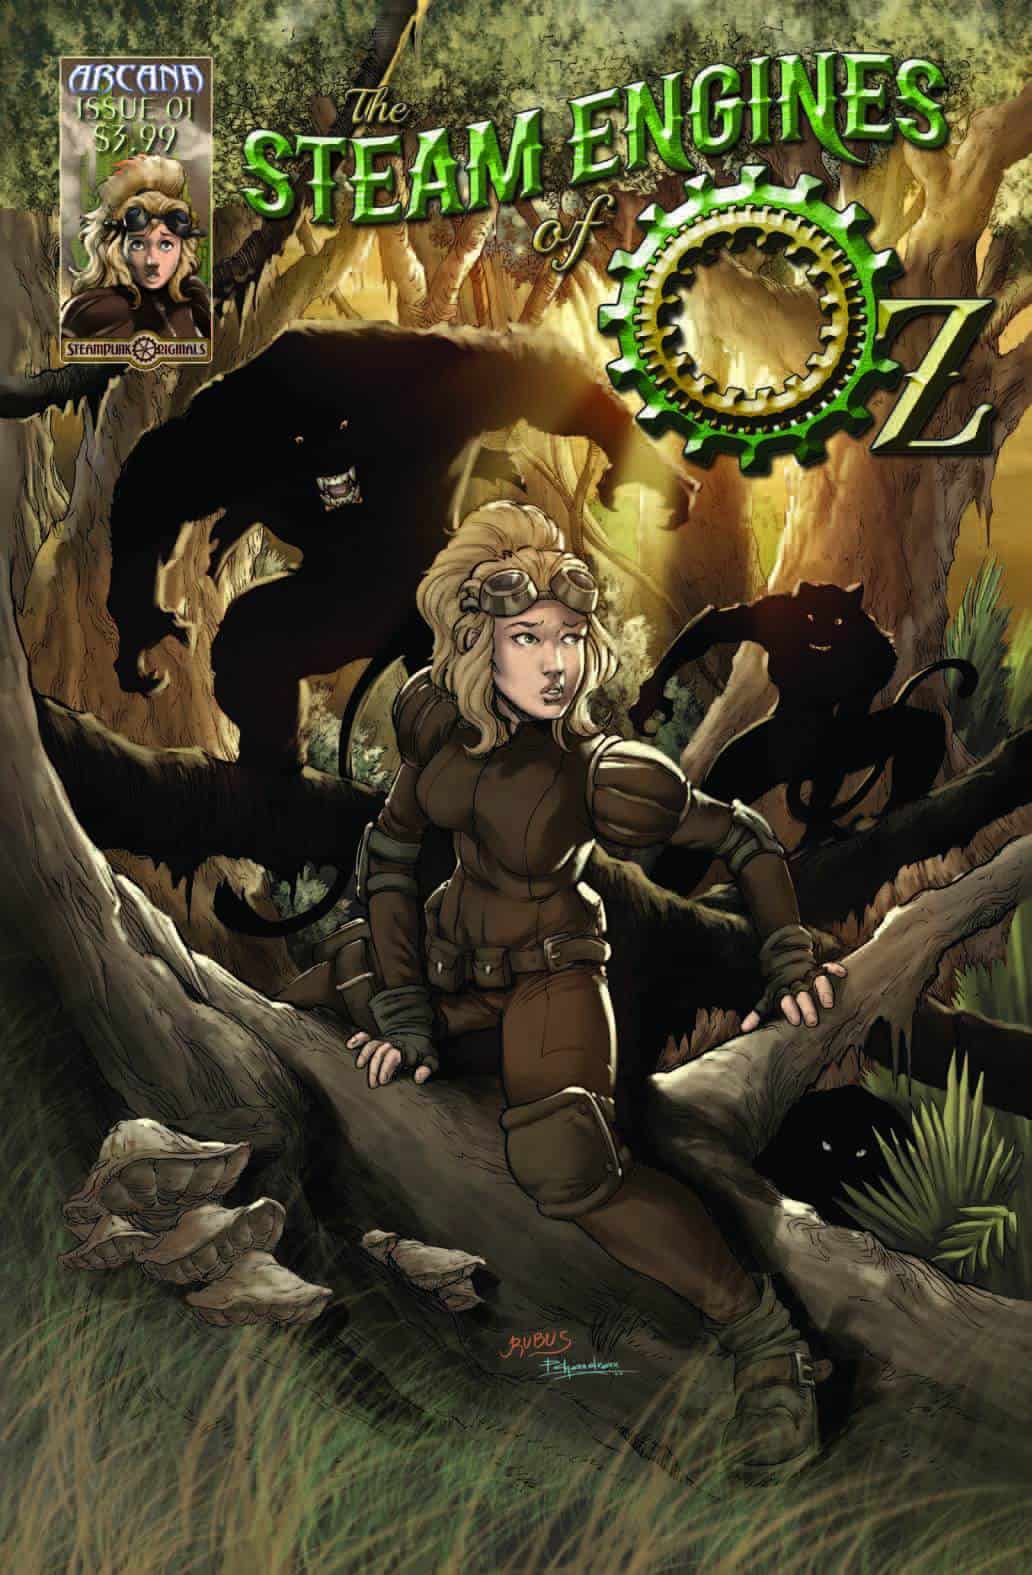 The-Steam-Engines-of-Oz-Cover